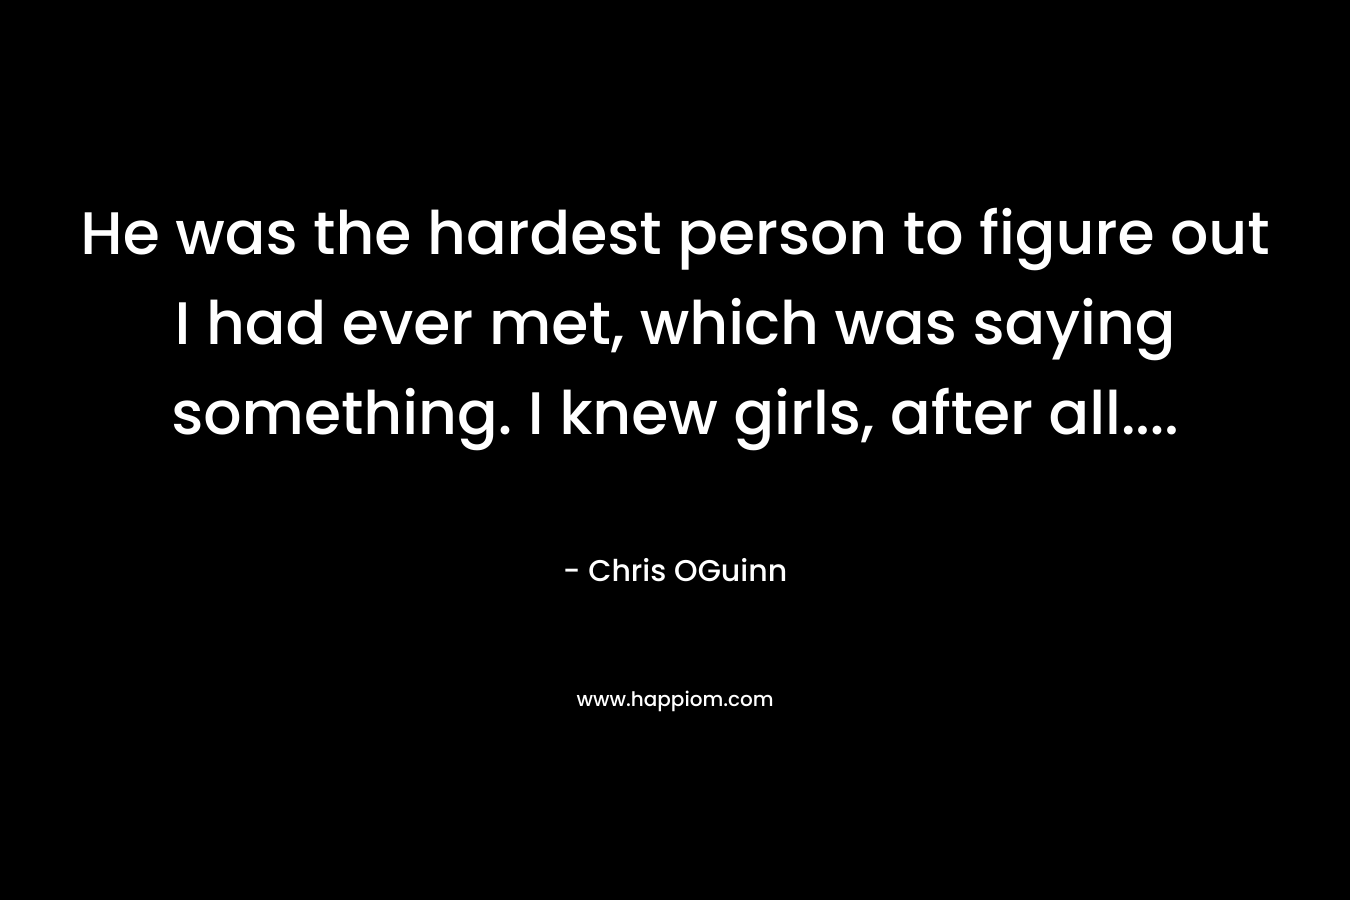 He was the hardest person to figure out I had ever met, which was saying something. I knew girls, after all…. – Chris OGuinn